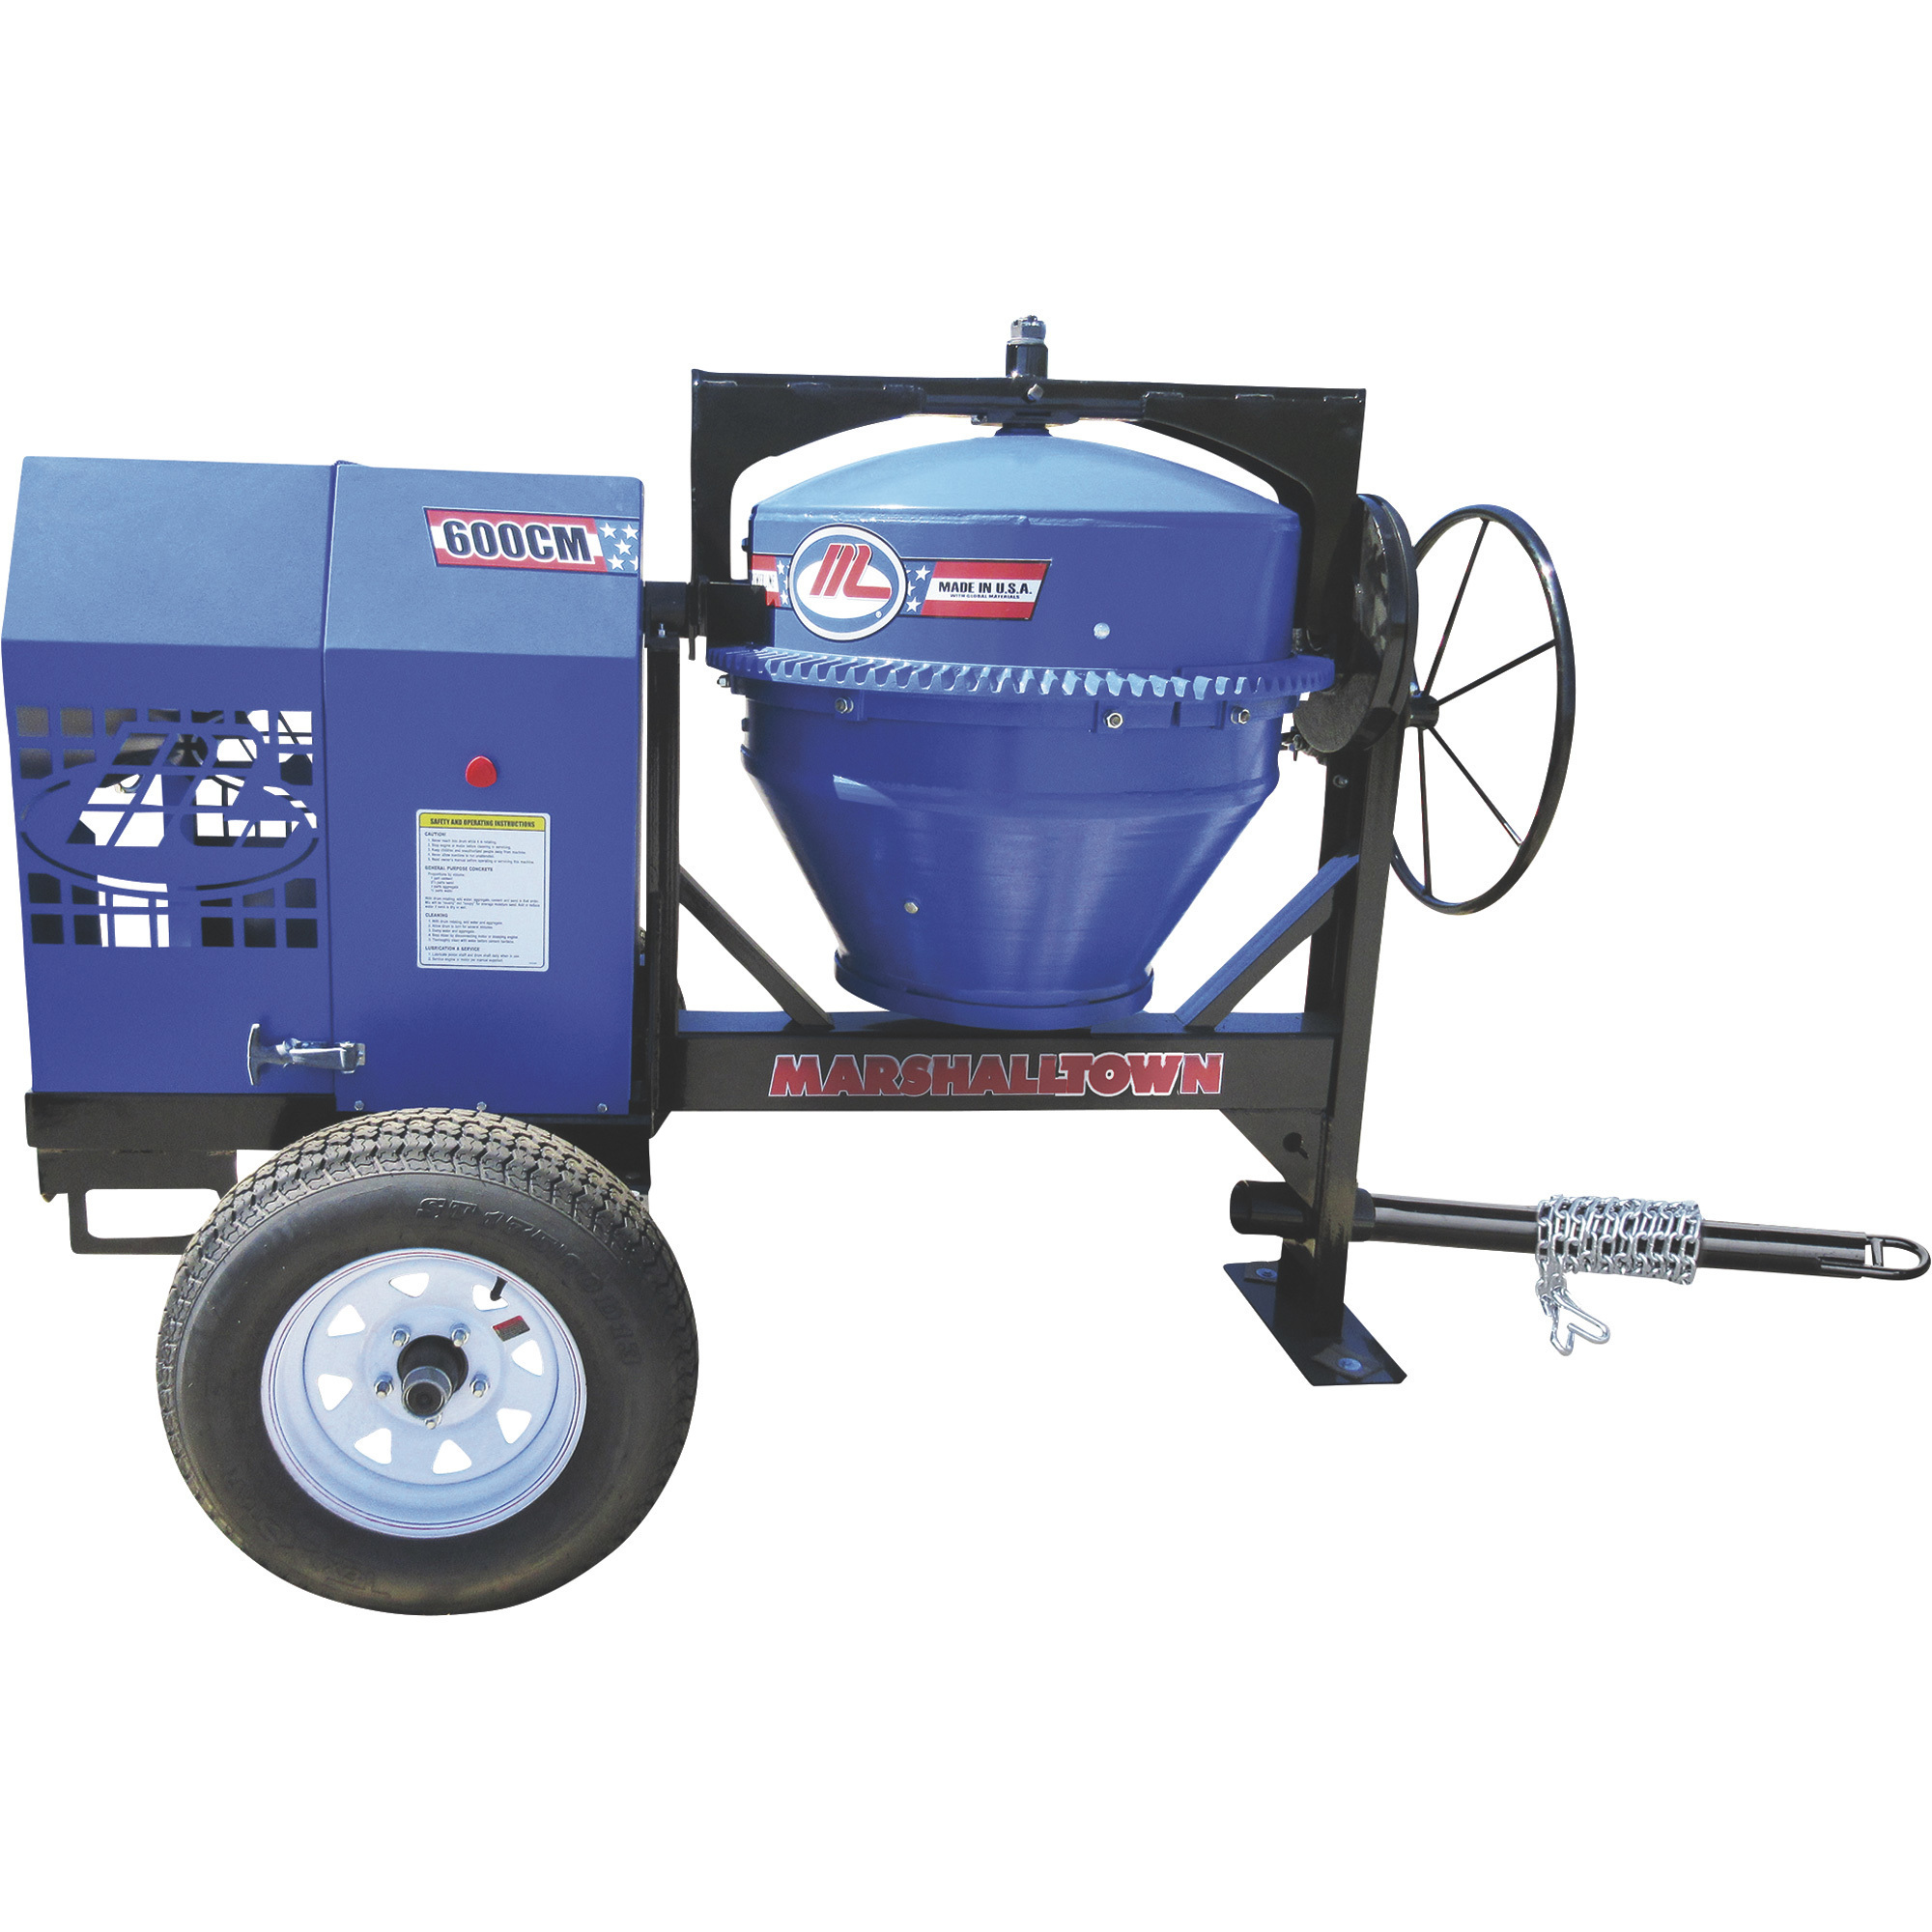 Marshalltown 600CM Concrete Mixer with Pintle Tow and 1.5 HP Electric Engine, 6 Cubic Ft. Mixing Capacity, Model MIX59292